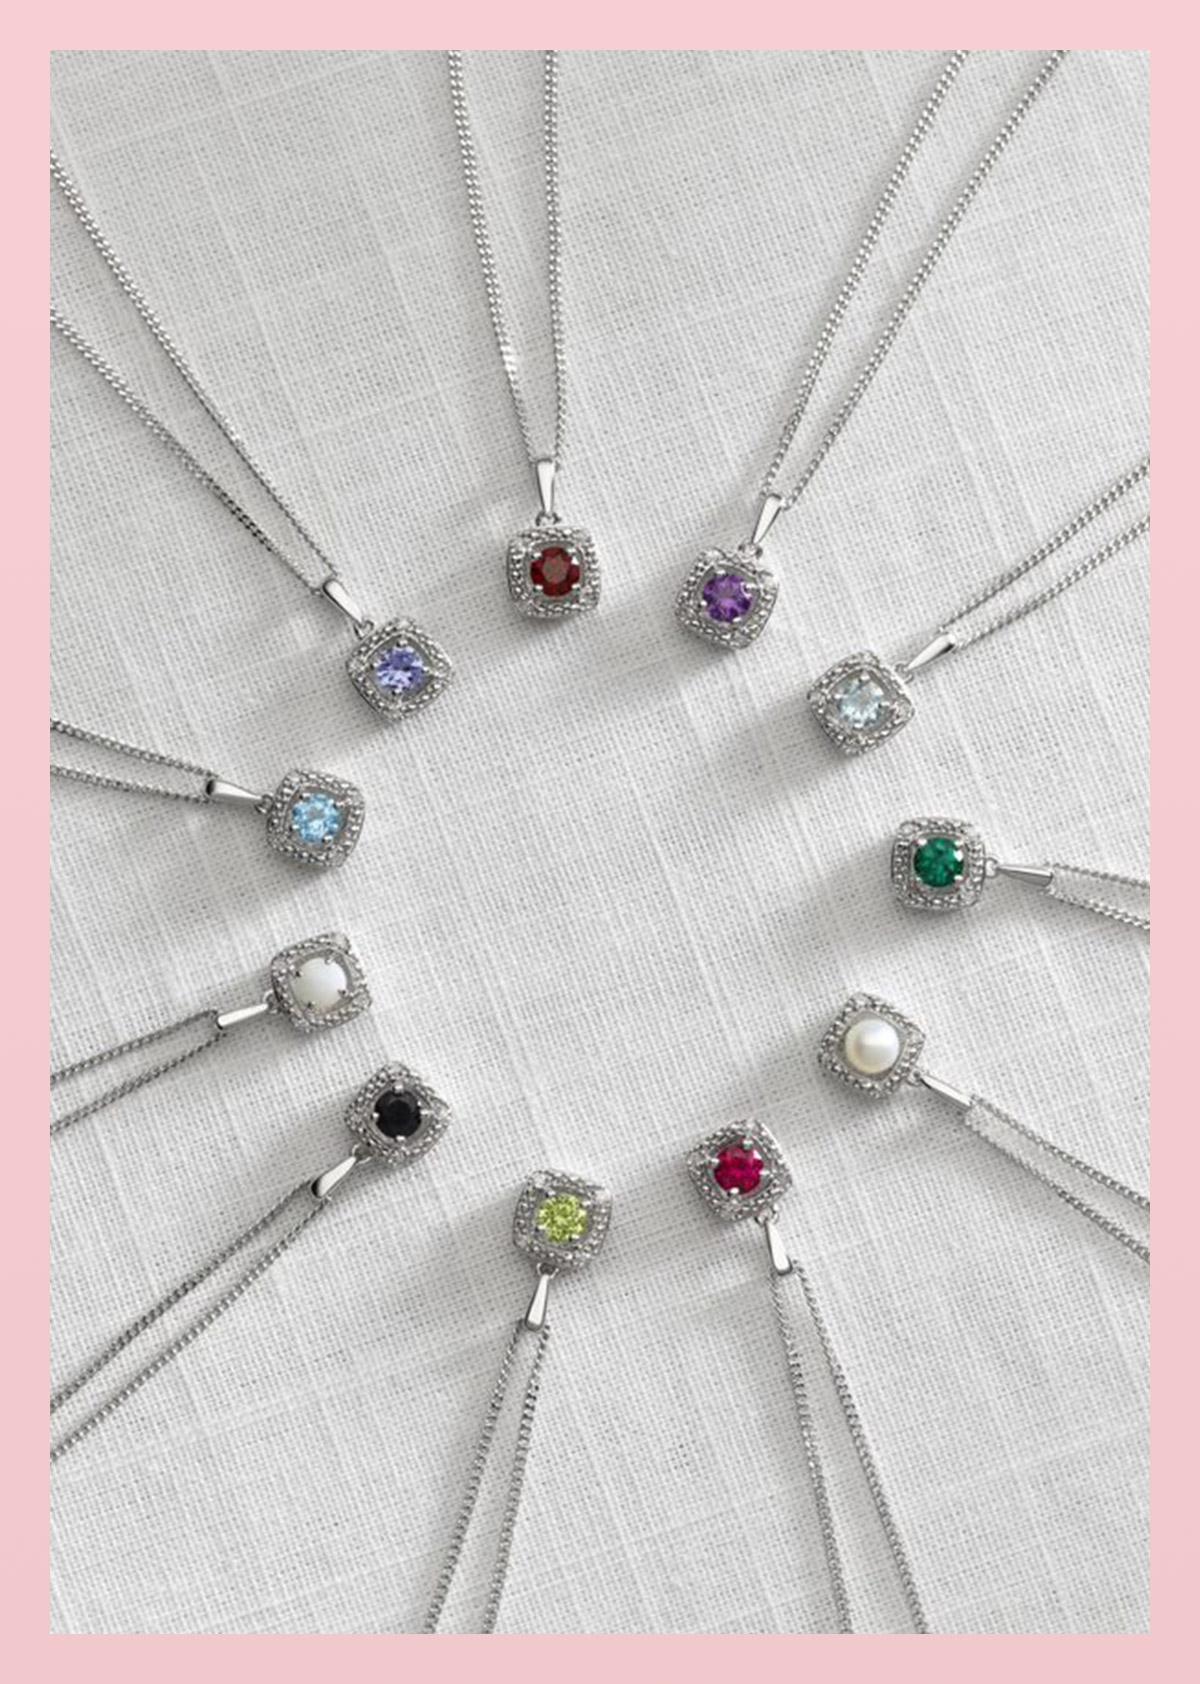 Birthstone necklaces in a circle